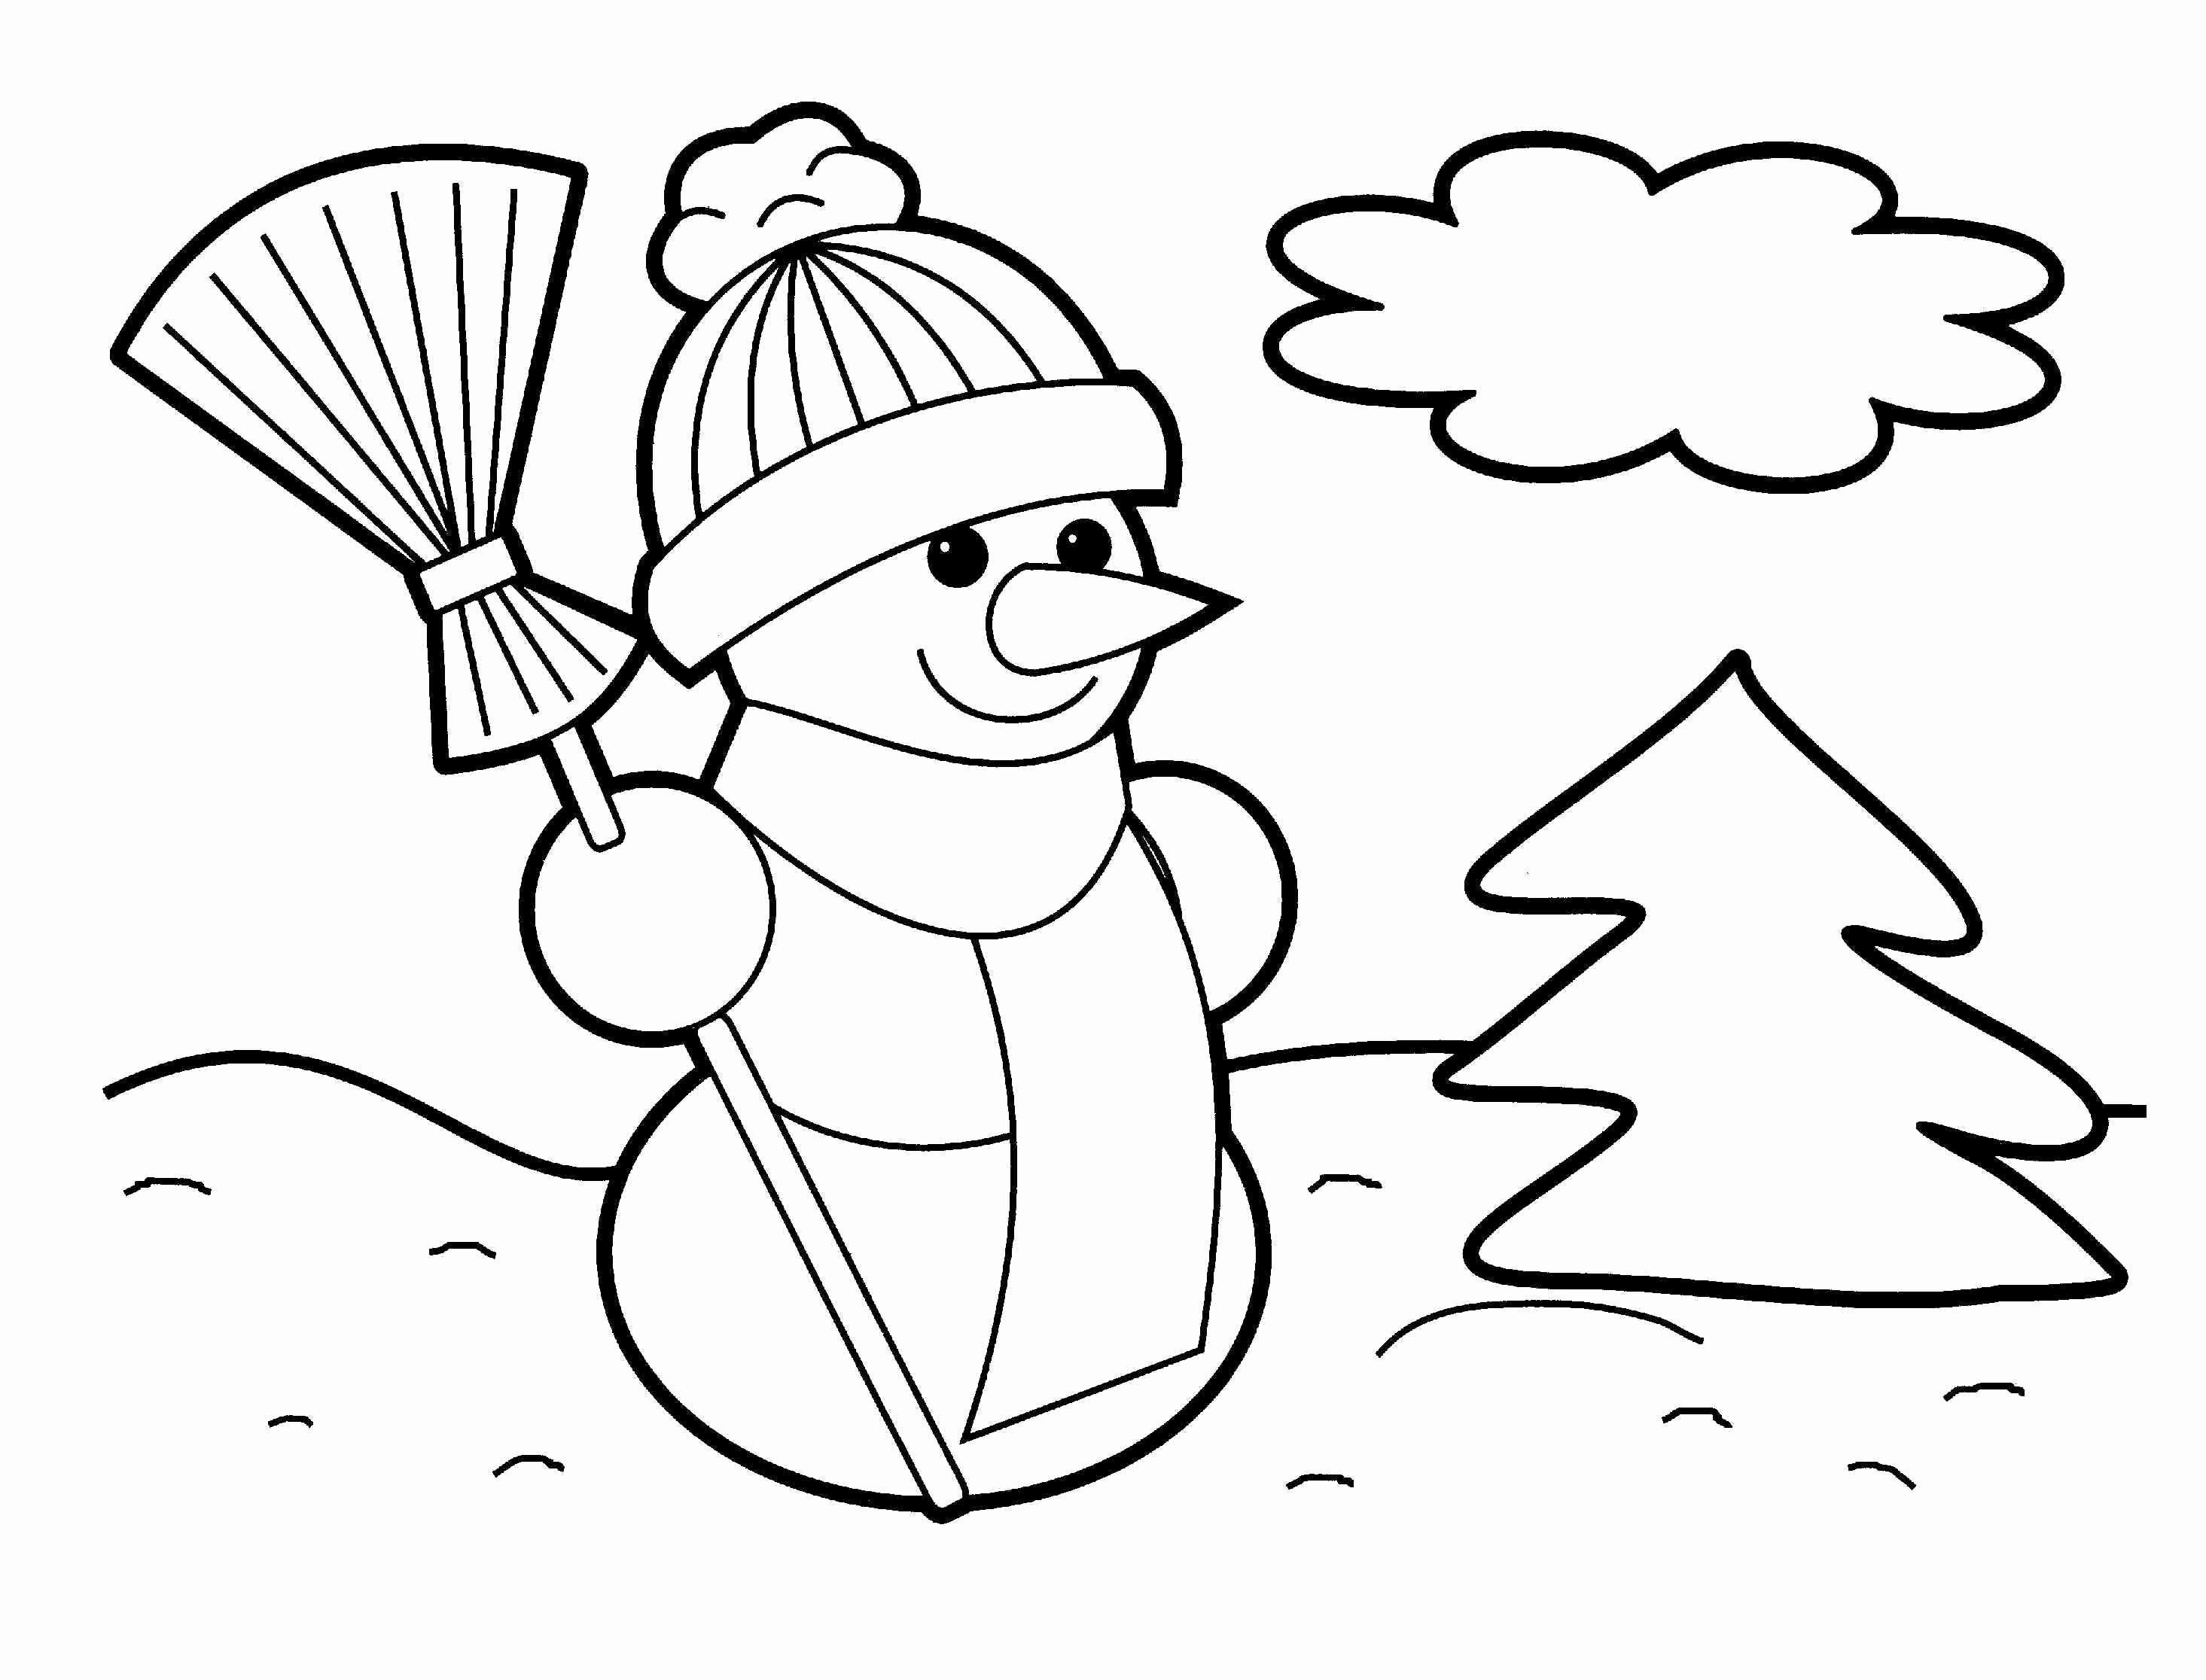 Candyland Characters Coloring Pages Beautiful Cute Winnie The Pooh Coloring Pages Jvzooreview